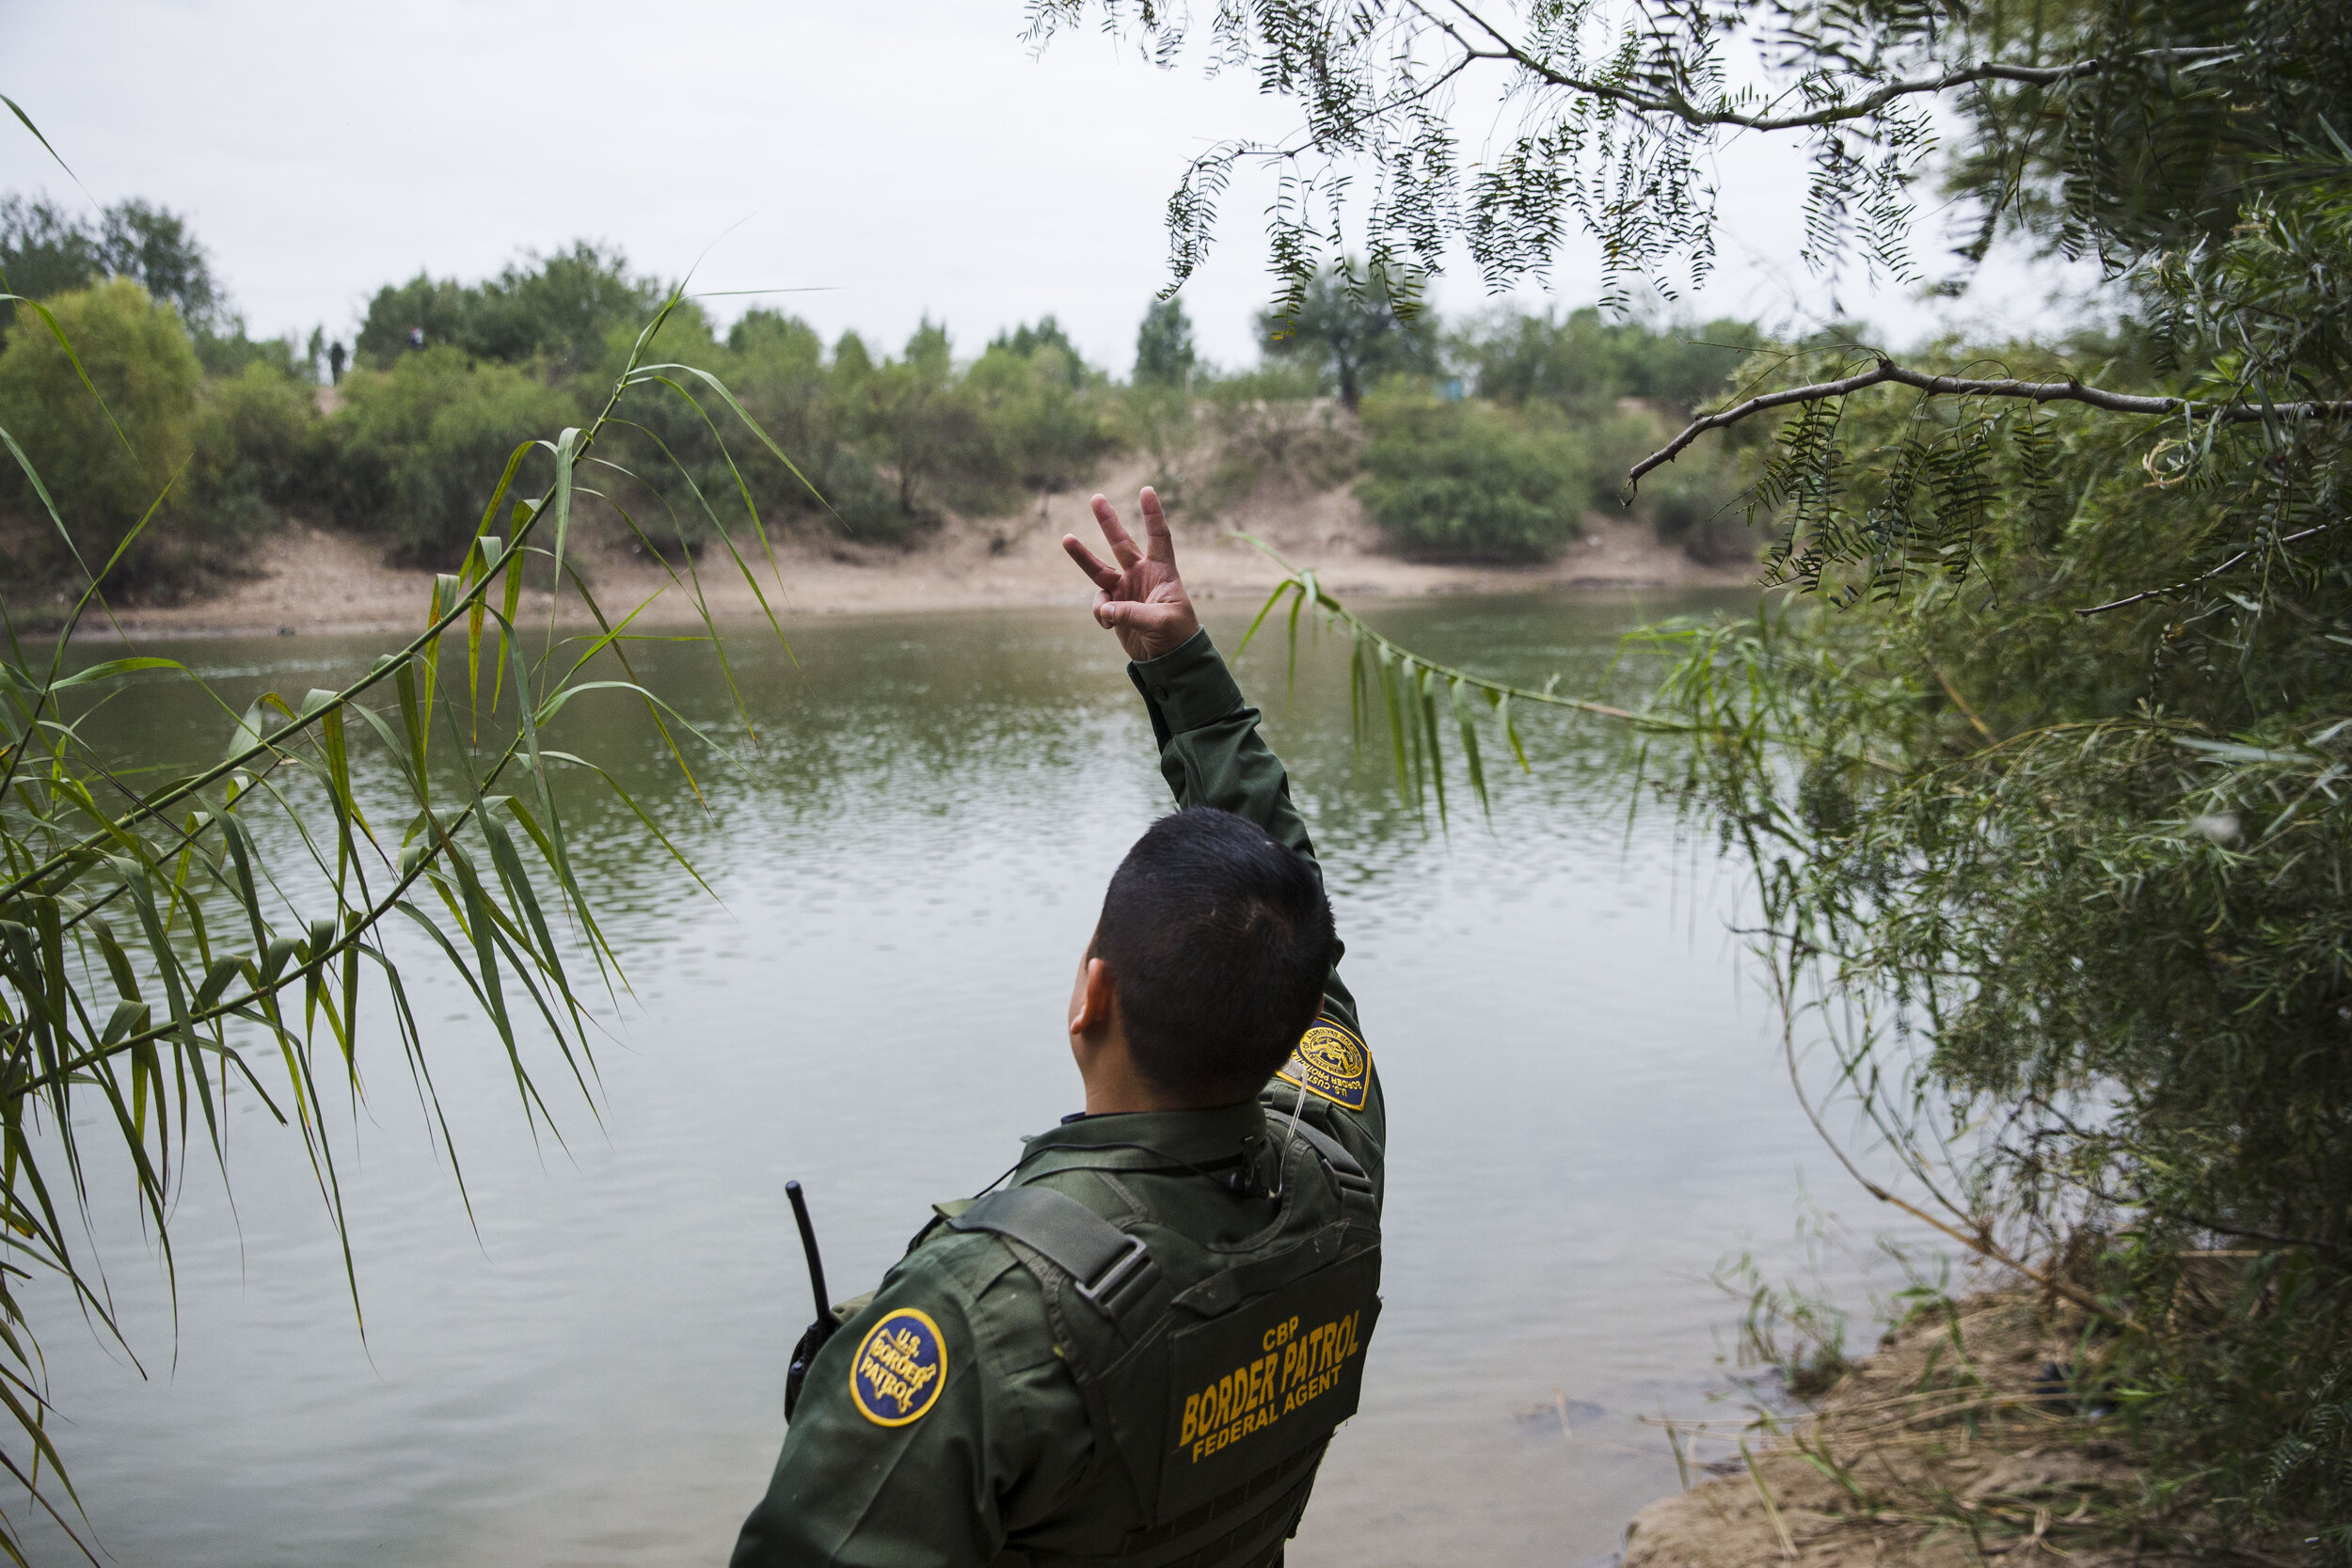  Border Patrol Agent Marcelino Medina signals across the Rio Grande River to the Mexican Military while patrolling for illegal border activity on Wednesday, Dec. 5, 2018, near McAllen, TX.   [Amanda Voisard/AMERICAN-STATESMAN]  